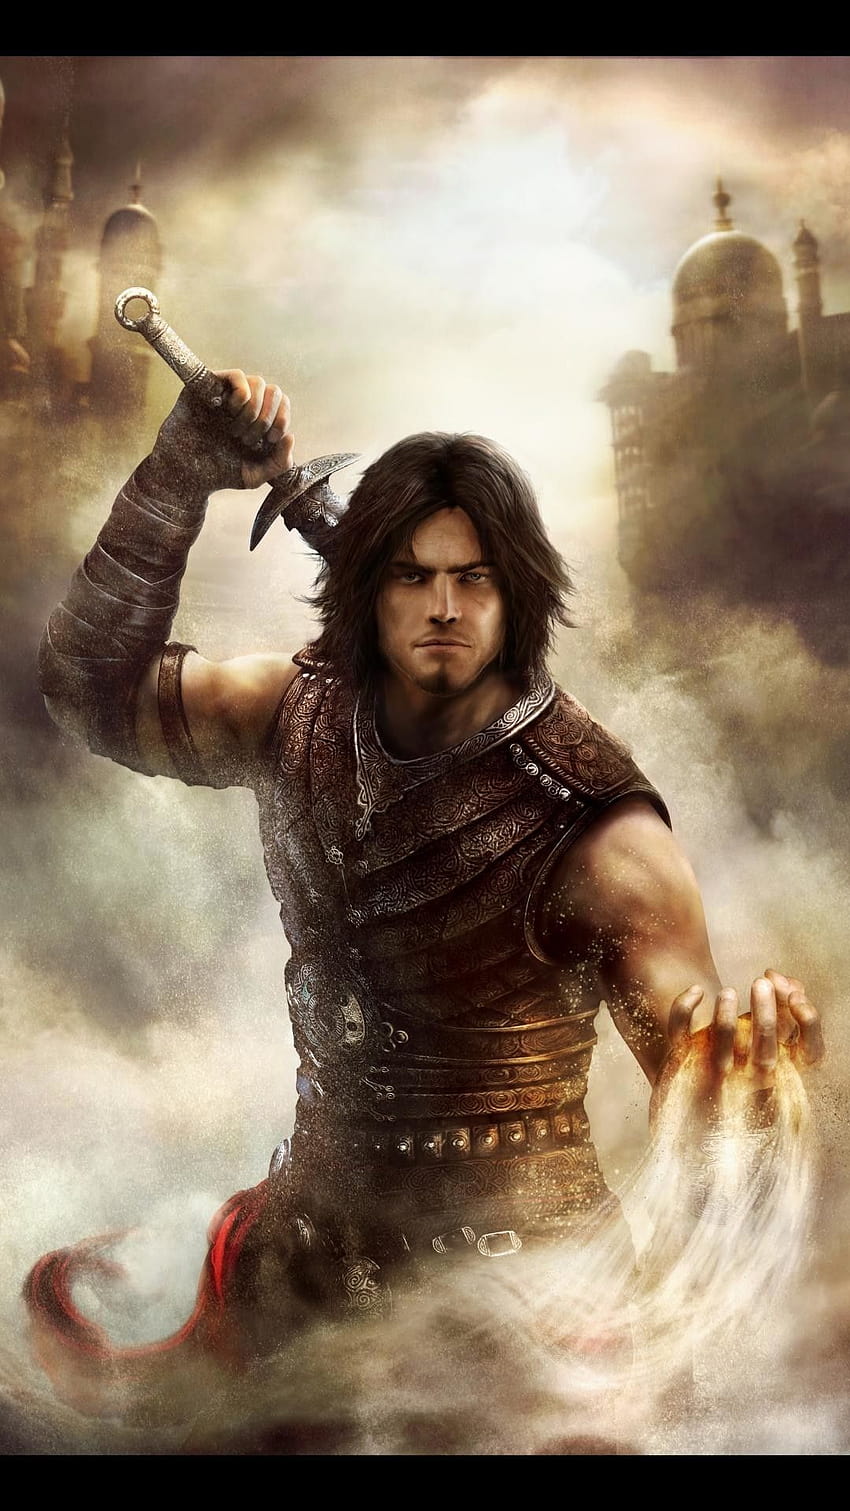 Of Prince Persia For Mobile Pics Computer, prince of persia 3 cellphone HD  phone wallpaper | Pxfuel